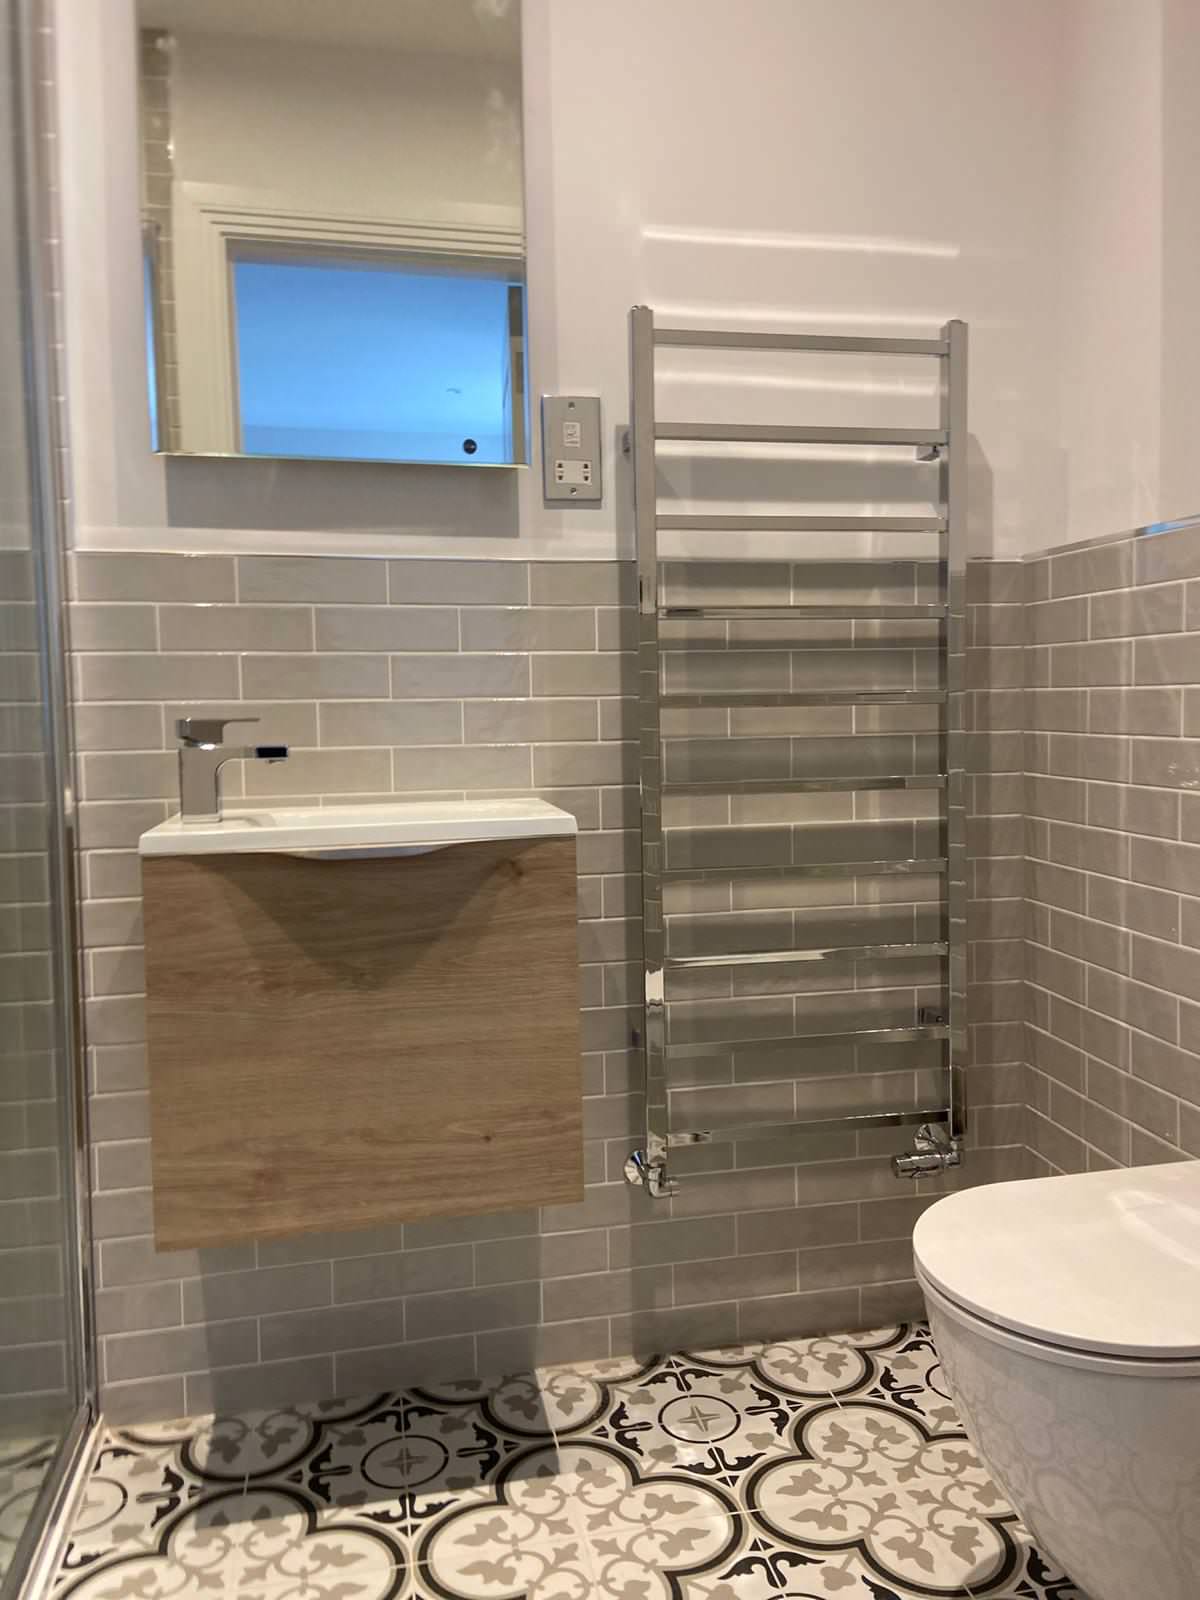 Four Luxury Bathrooms and a Cloakroom for Zafiro Homes LTD